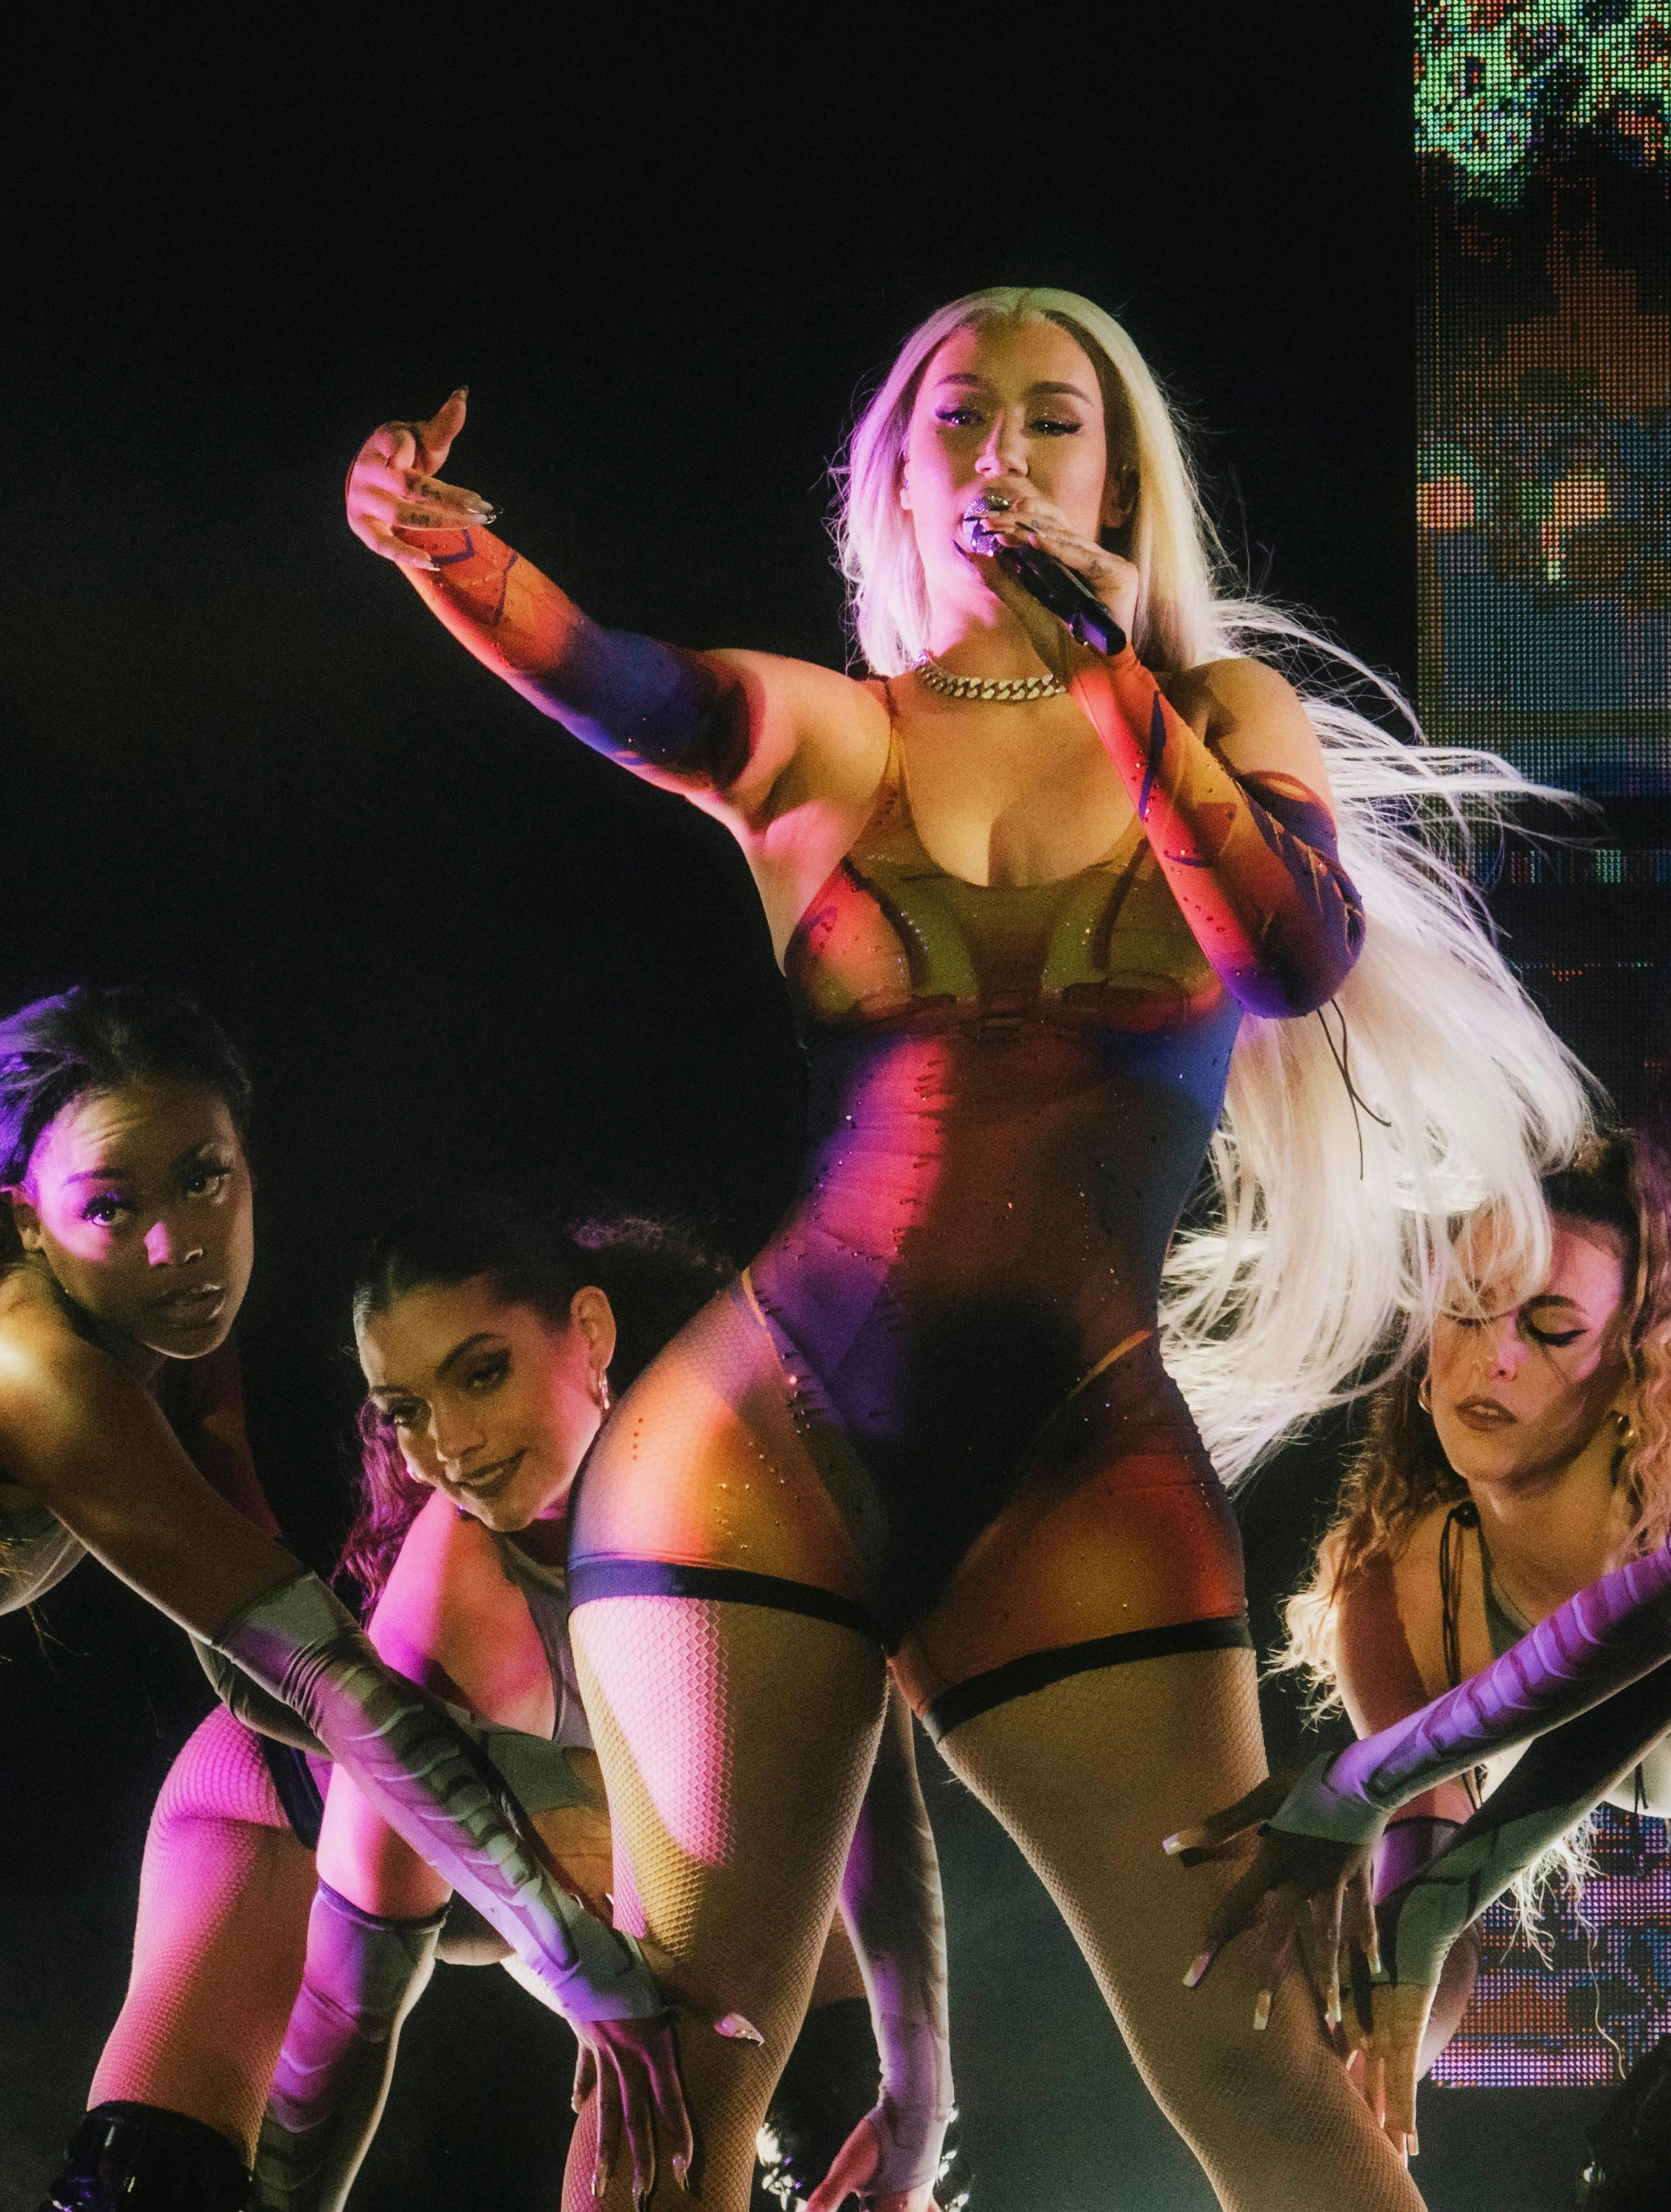 Iggy Azalea performs at Smoothie King Center in New Orleans, Louisiana on Thursday, October 6th, 2022